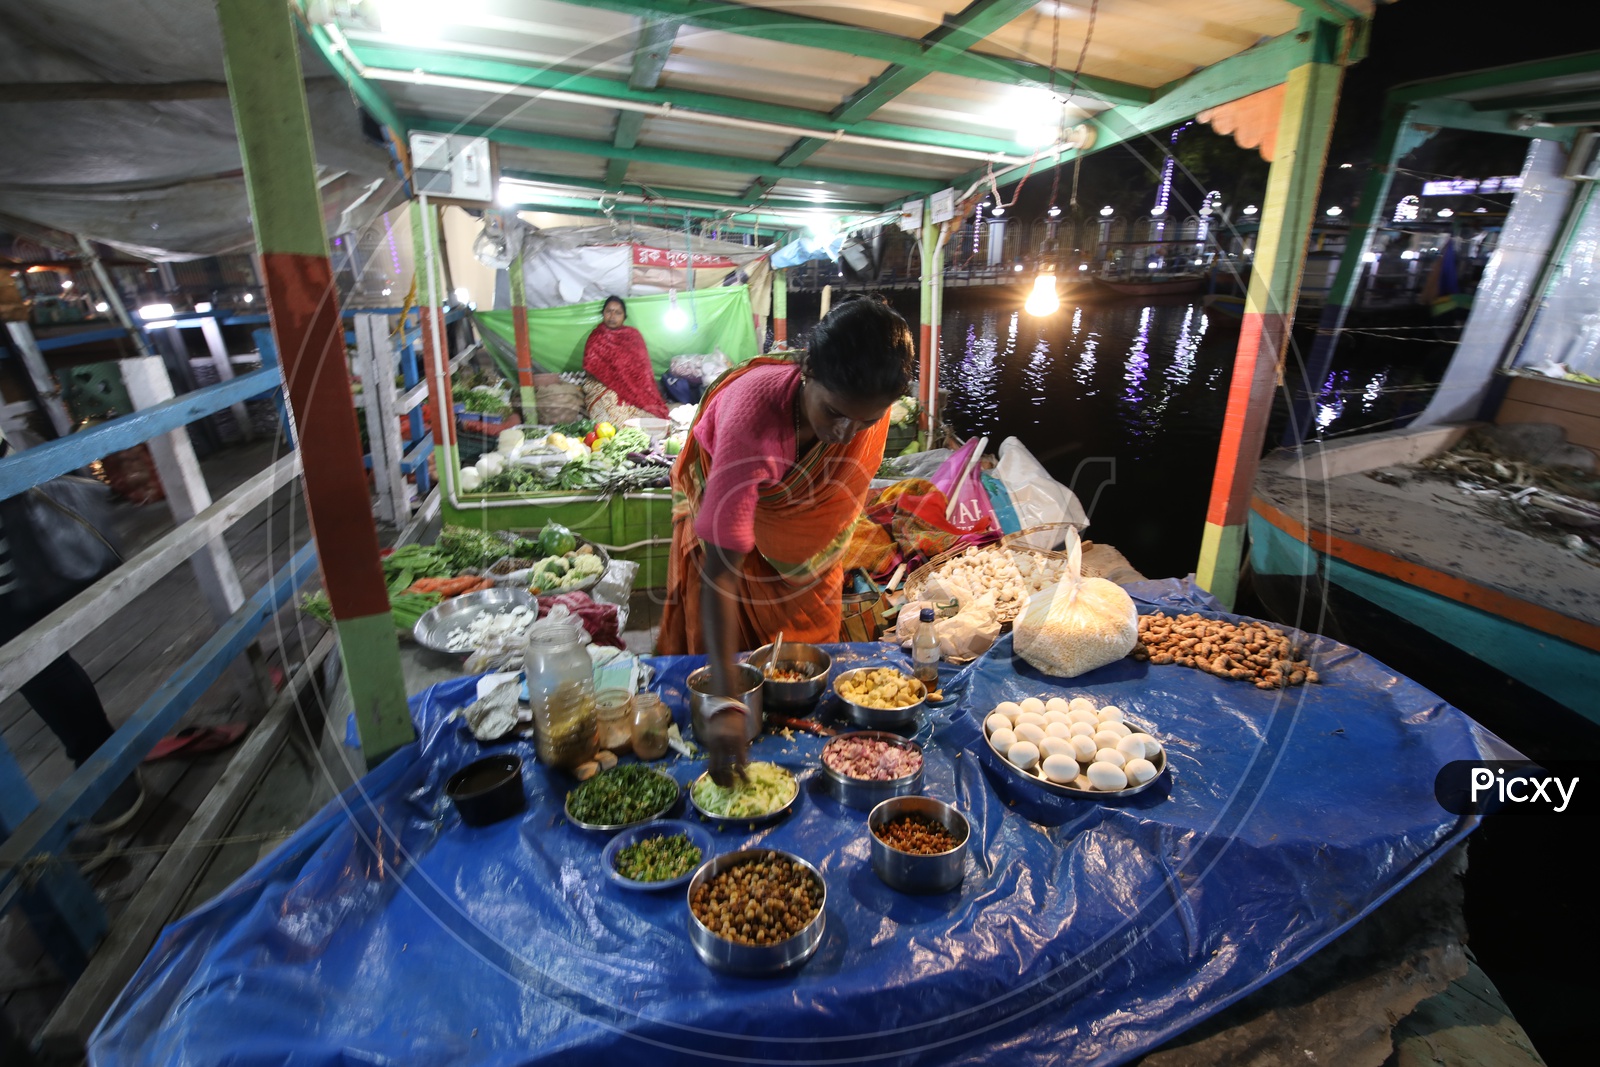 A Woman Street Food Vendor In a Stall At The Floating Market